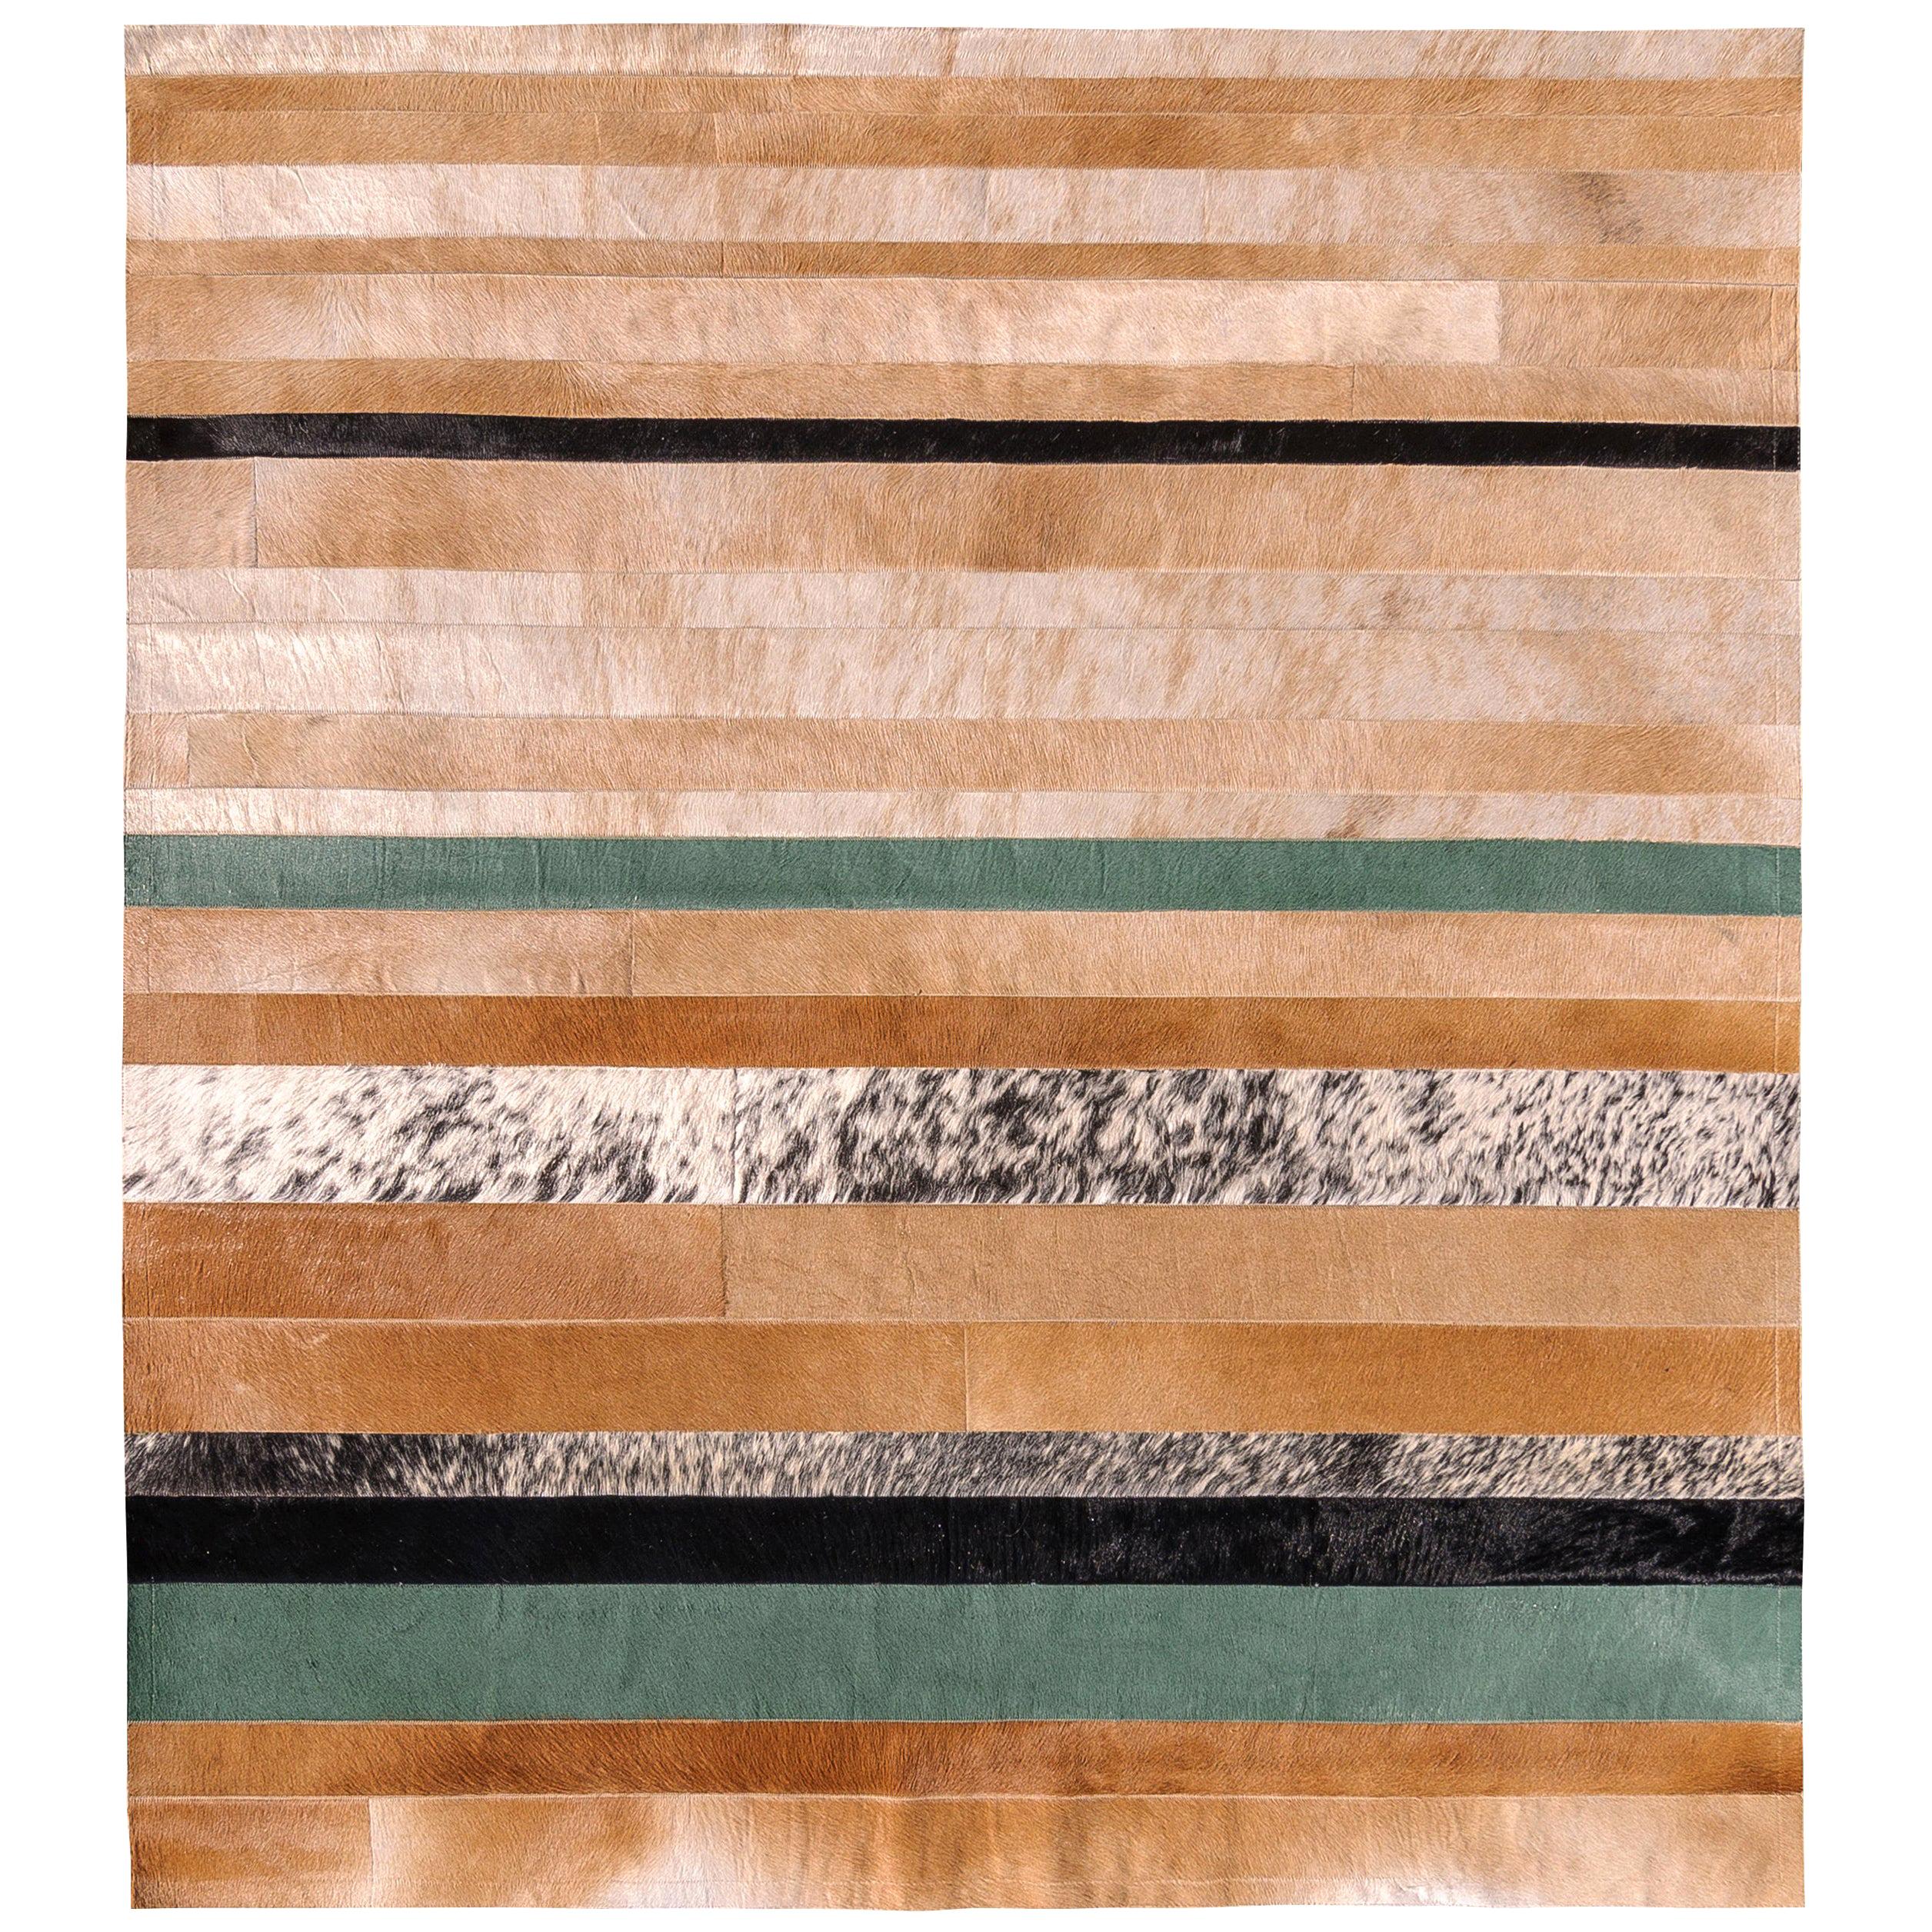 Natural brown, black and green striped Division Cowhide Area Floor Rug Medium  For Sale